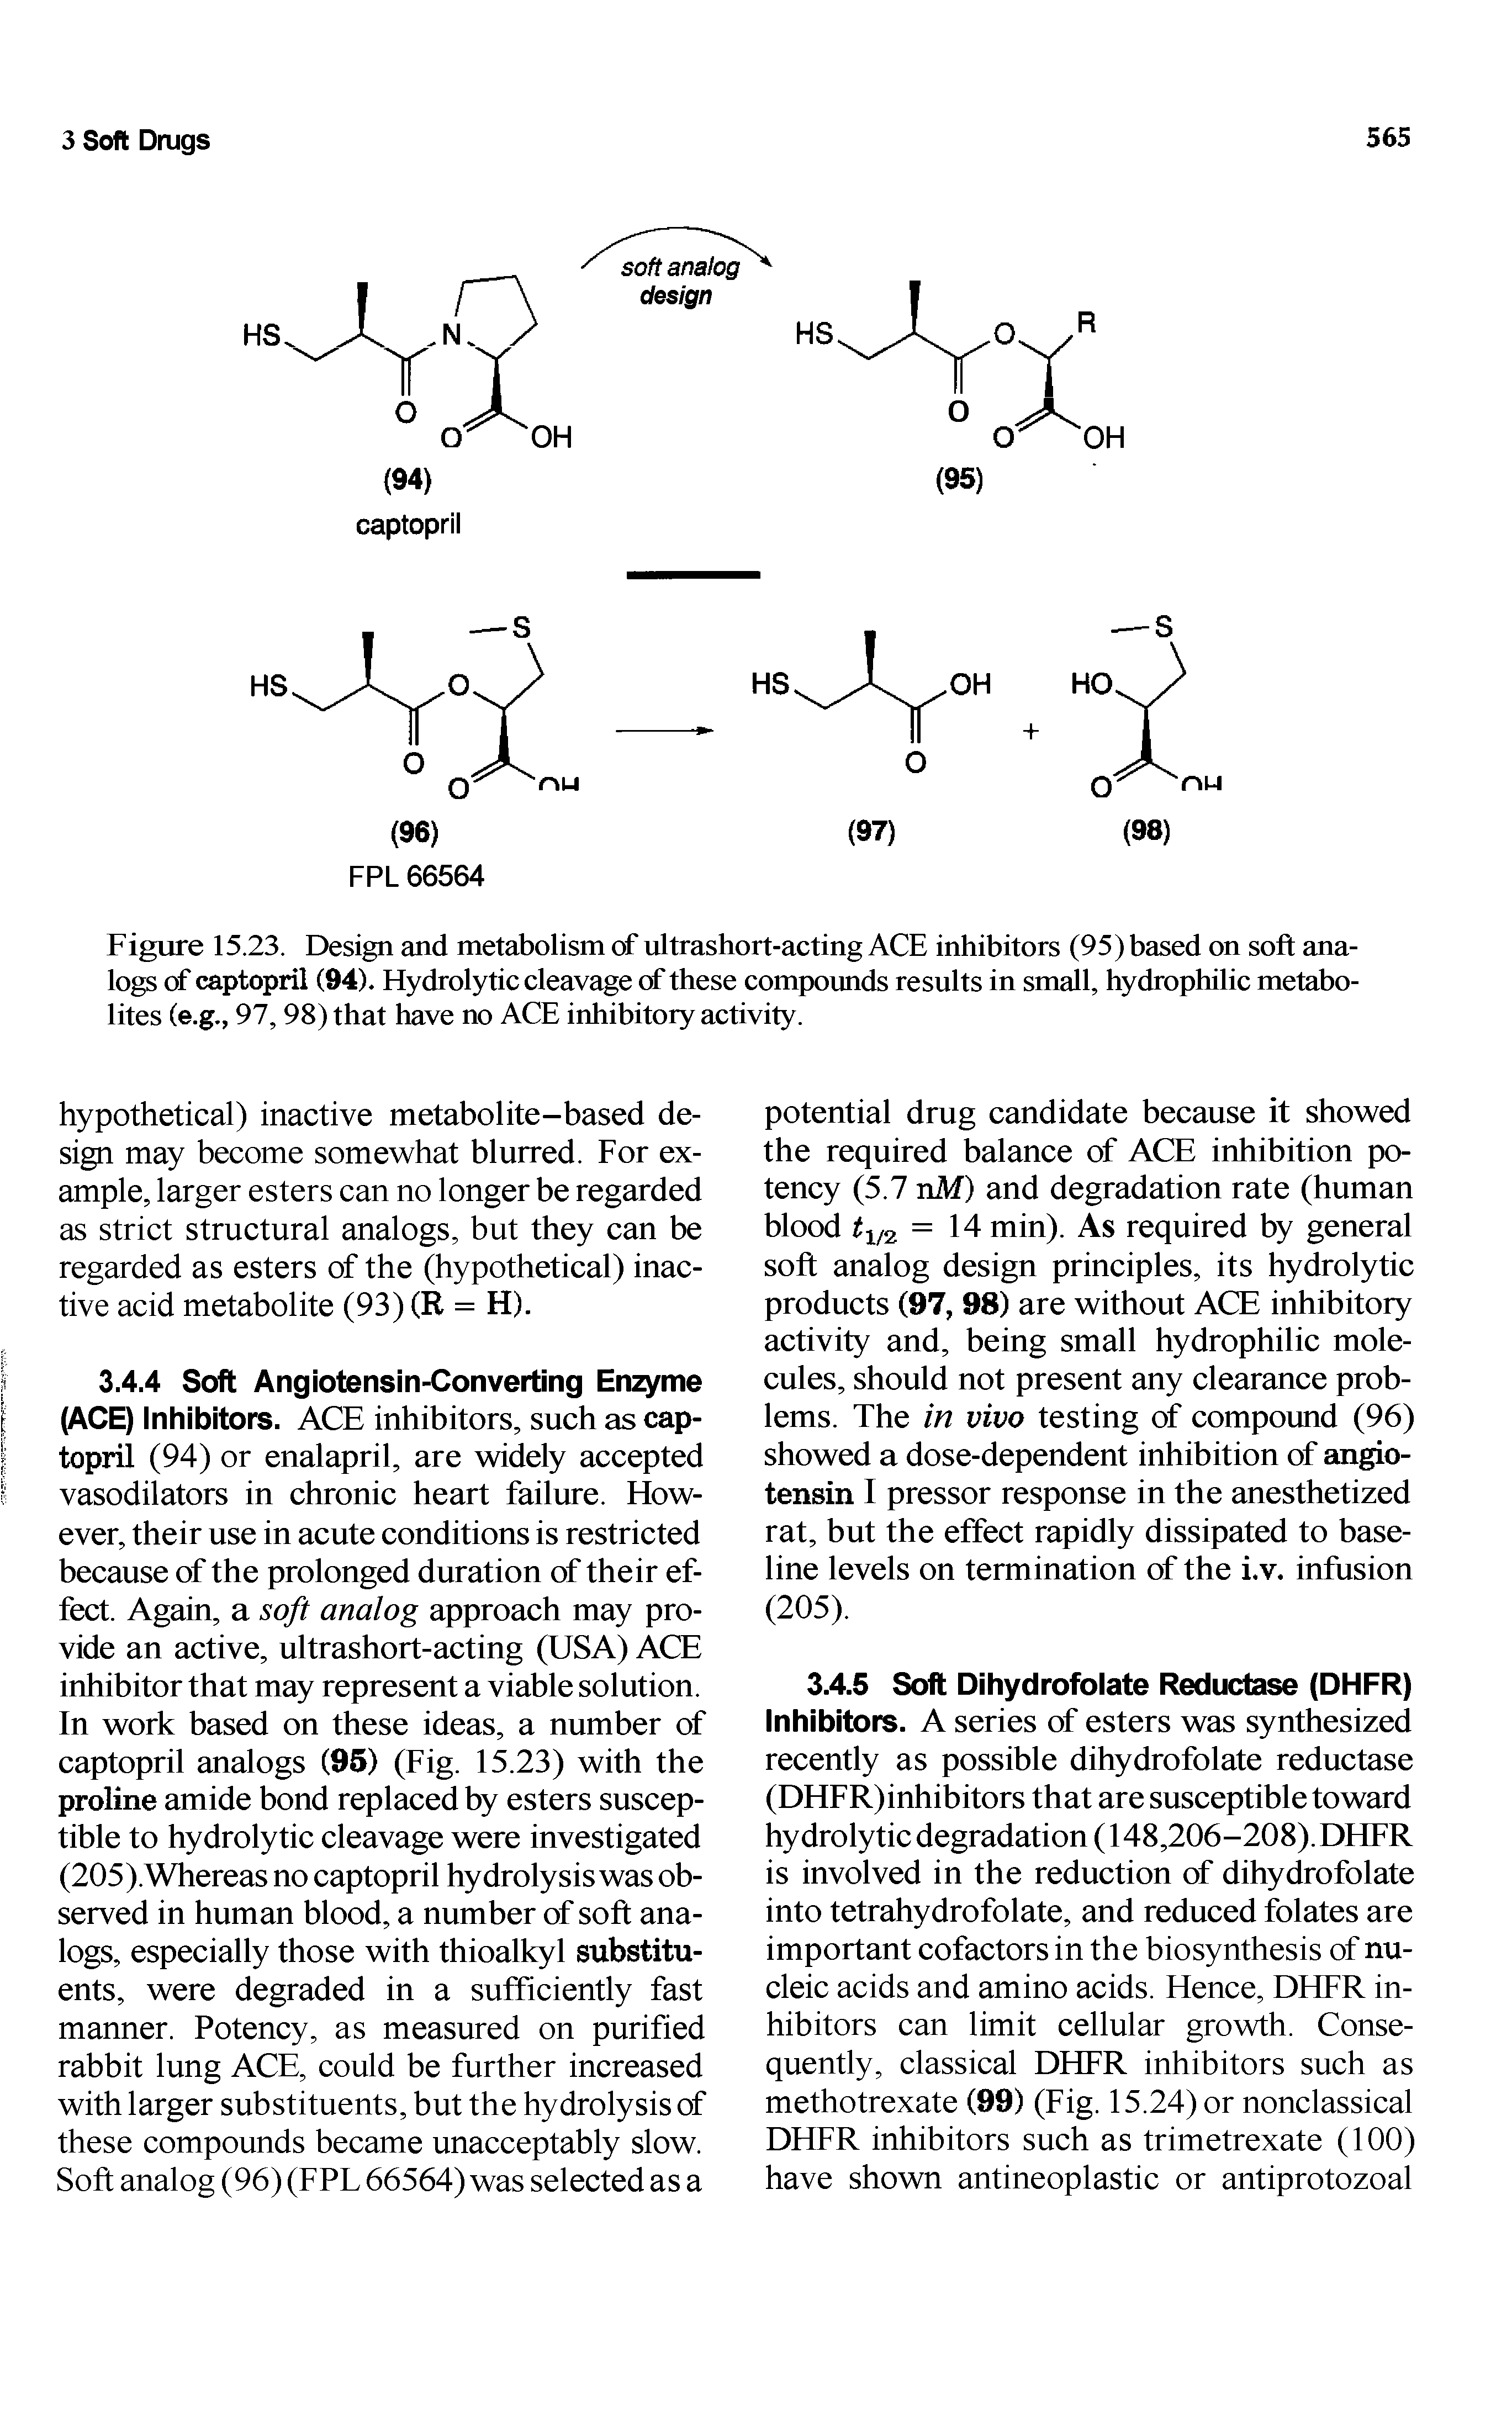 Figure 15.23. Design and metabolism of ultrashort-acting ACE inhibitors (95) based on soft analogs of captopril (94). Hydrolytic cleavage of these compounds results in small, hydrophilic metabolites (e.g., 97, 98) that have no ACE inhibitory activity.